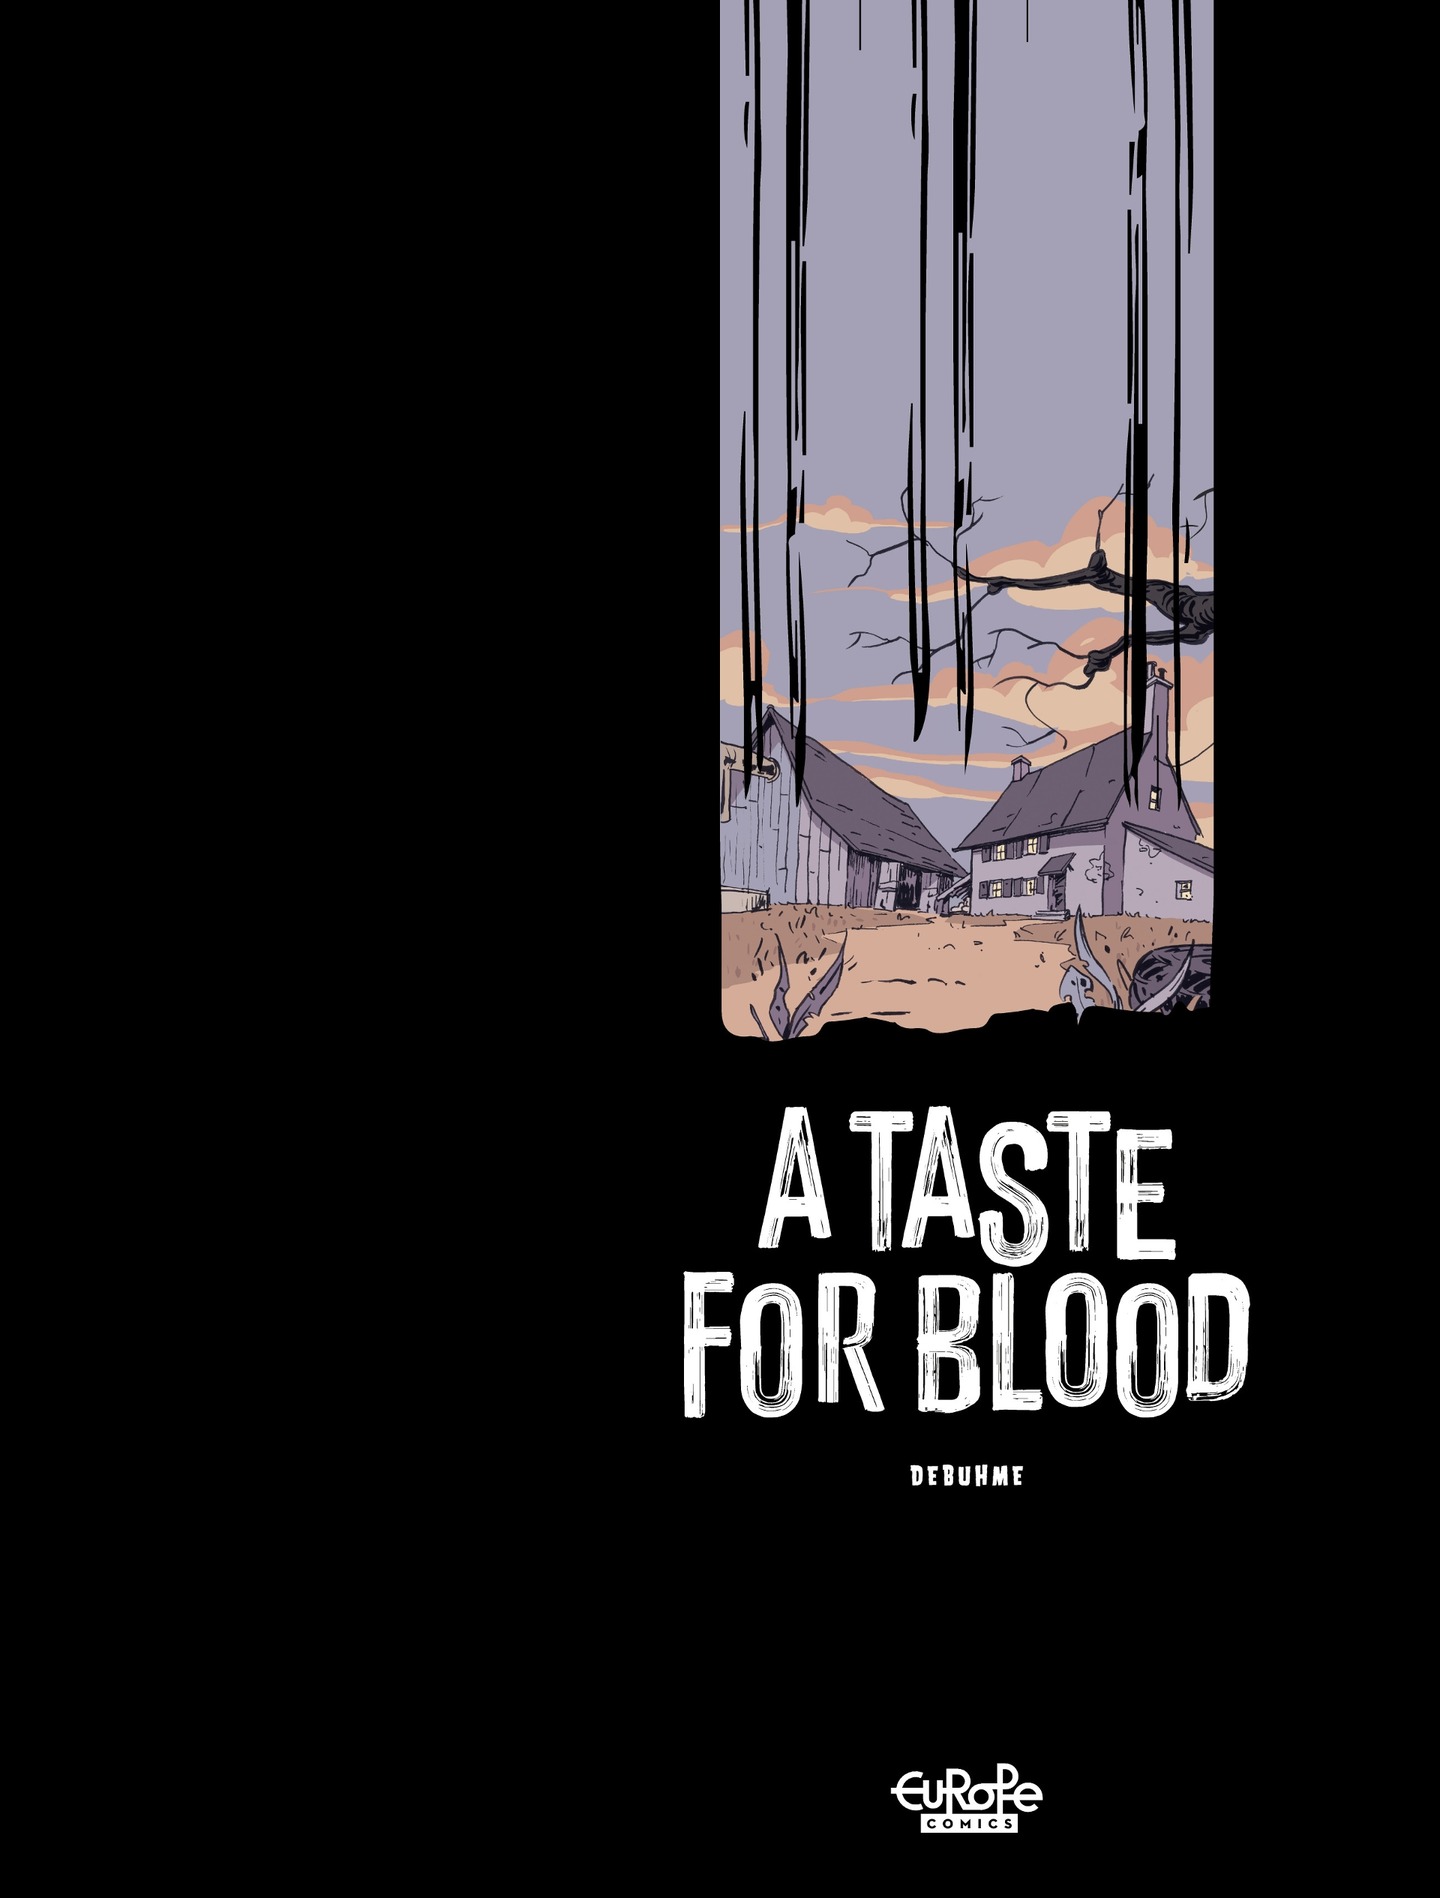 Read online A Taste for Blood comic -  Issue # TPB - 2